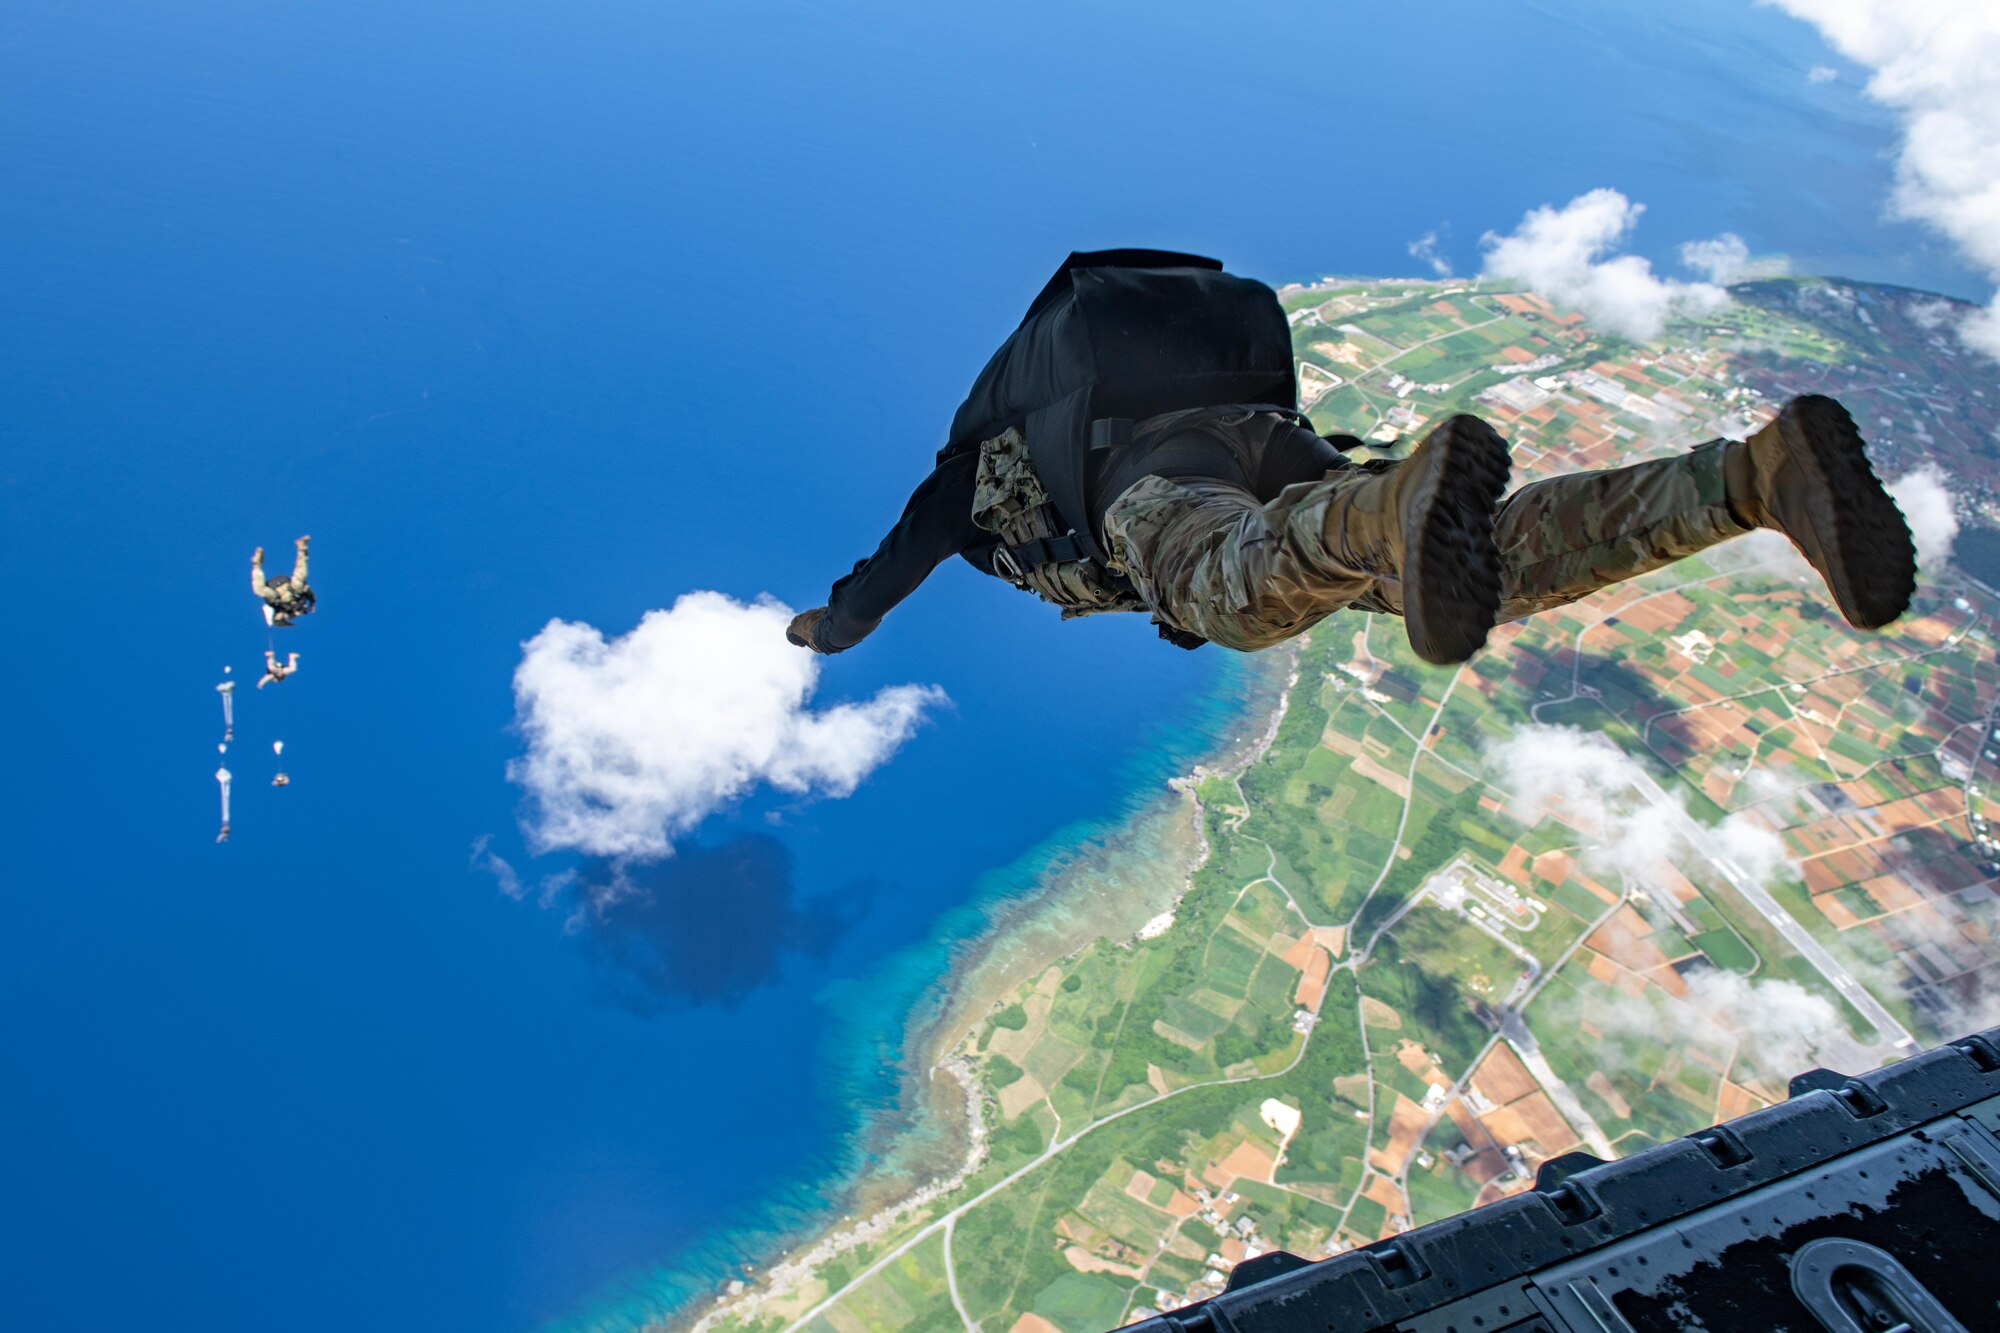 A Navy member jumps after his buddies from a plane over the coast of Japan.